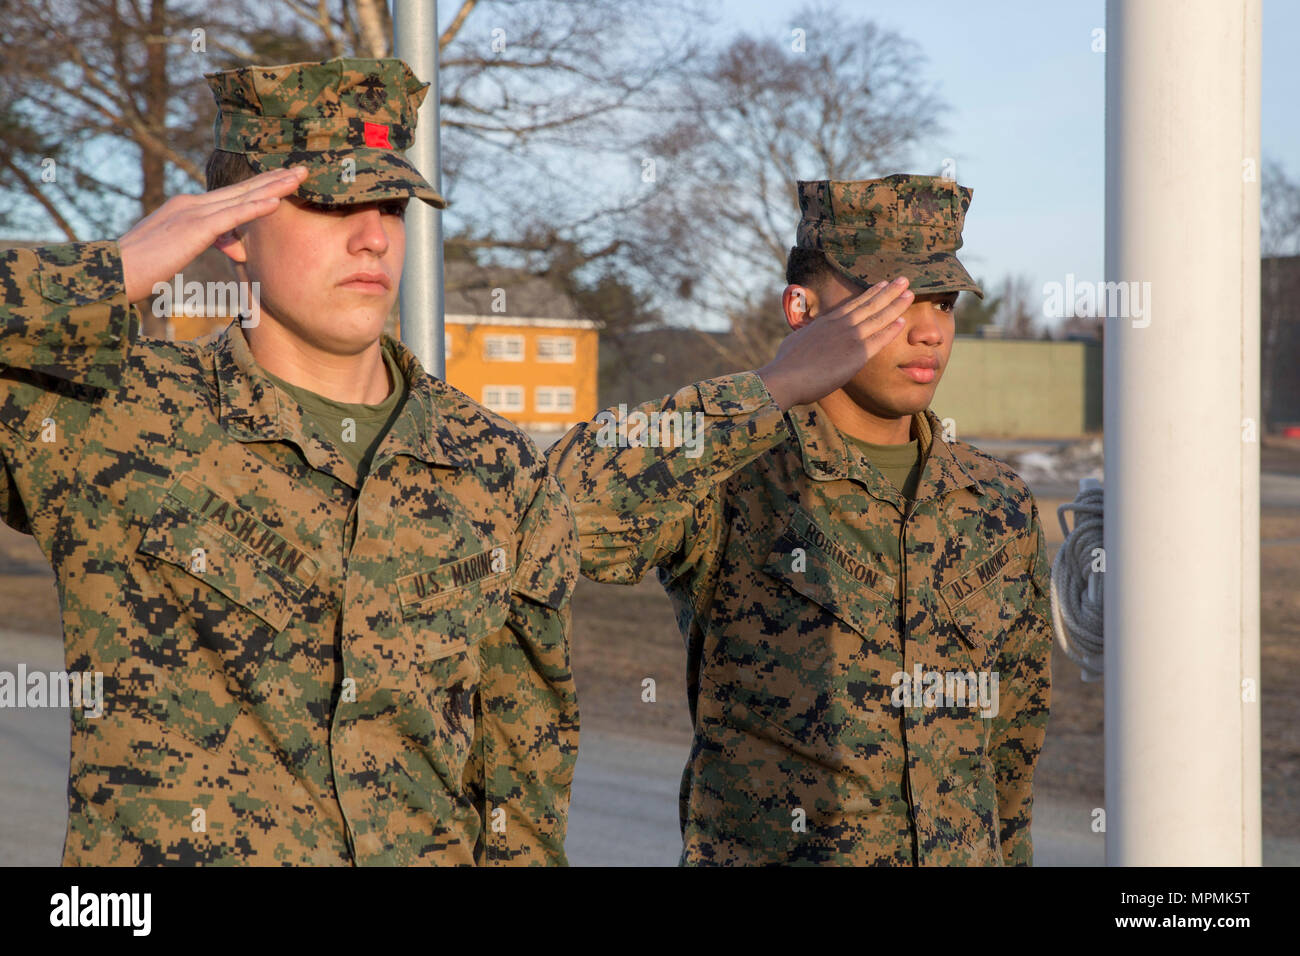 U.S. Marines Lance Cpl. Jack Tashjian and Lance Cpl. Austin Robinson, a landing support specialist and warehouse clerk respectively, salute the American flag at Vaernes Garnison, March 30, 2017. Marine Rotational Force Europe 17.1 upholds traditions as Marines and sailors represent a forward presence in Europe. (U.S. Marine Corps photo by Lance Cpl. Victoria Ross) Stock Photo